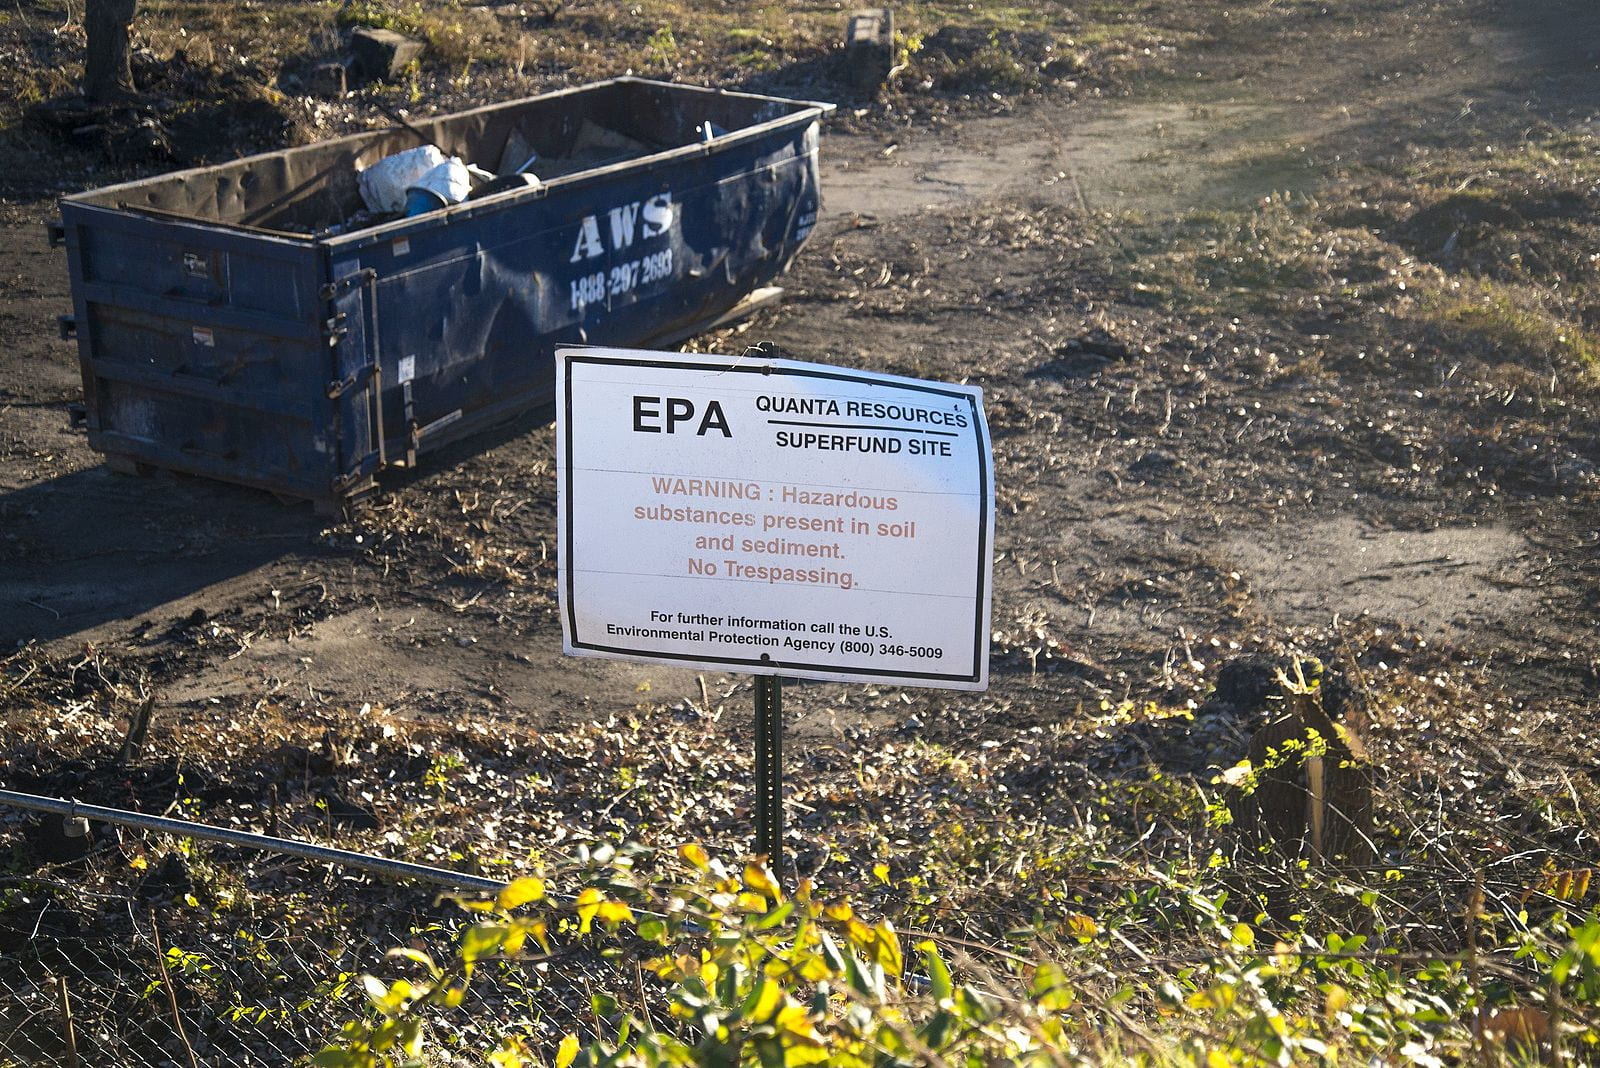 People of Color Live Disproportionately Close to Superfund Sites